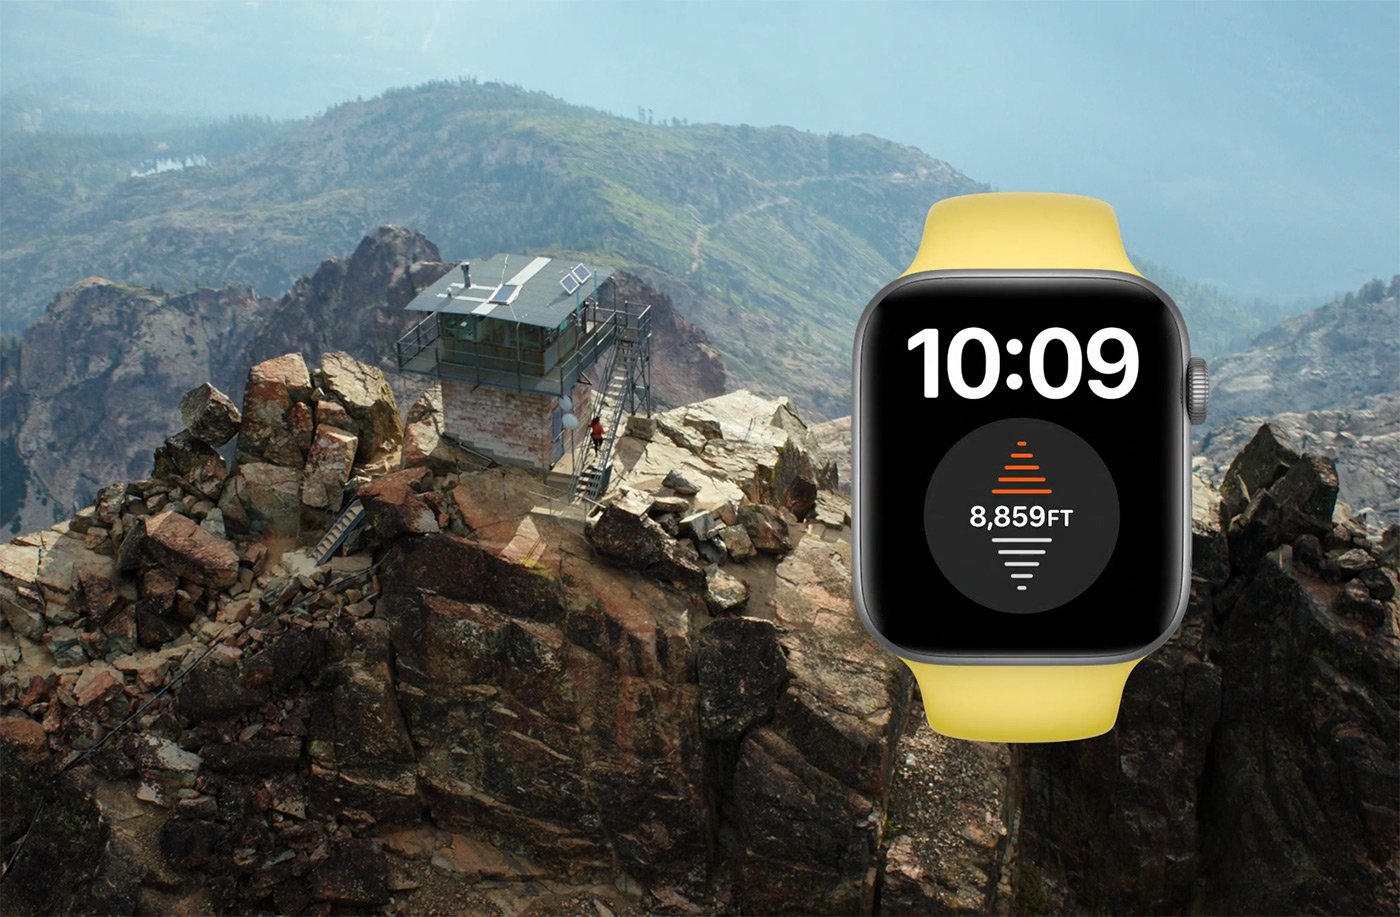 Apple's next victory: new Apple Watch and iPad